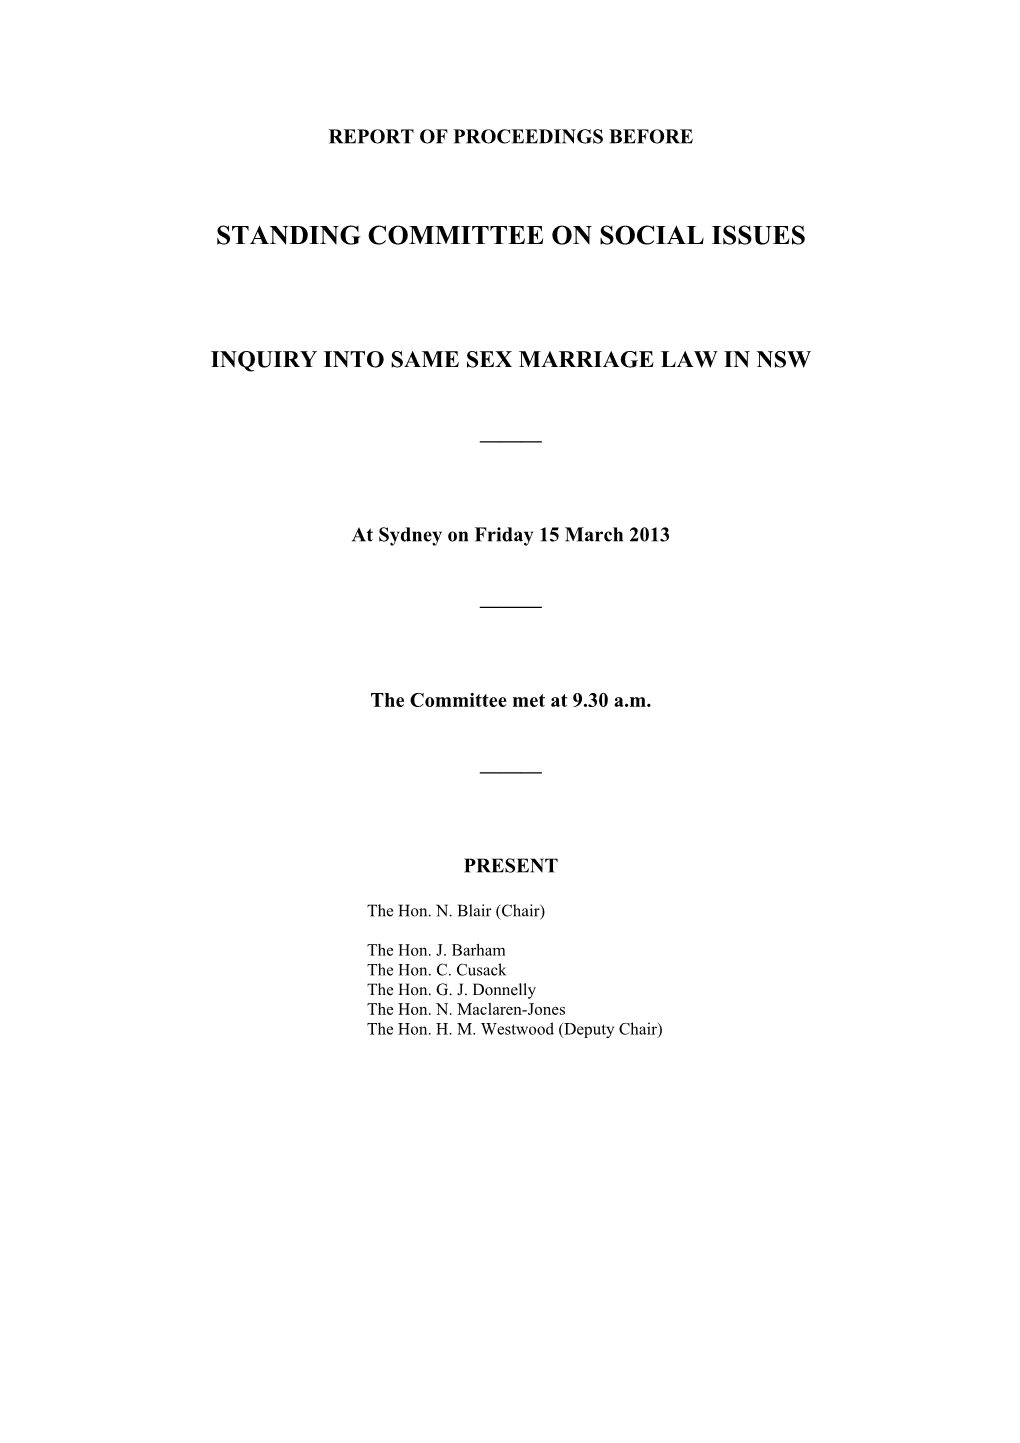 Standing Committee on Social Issues